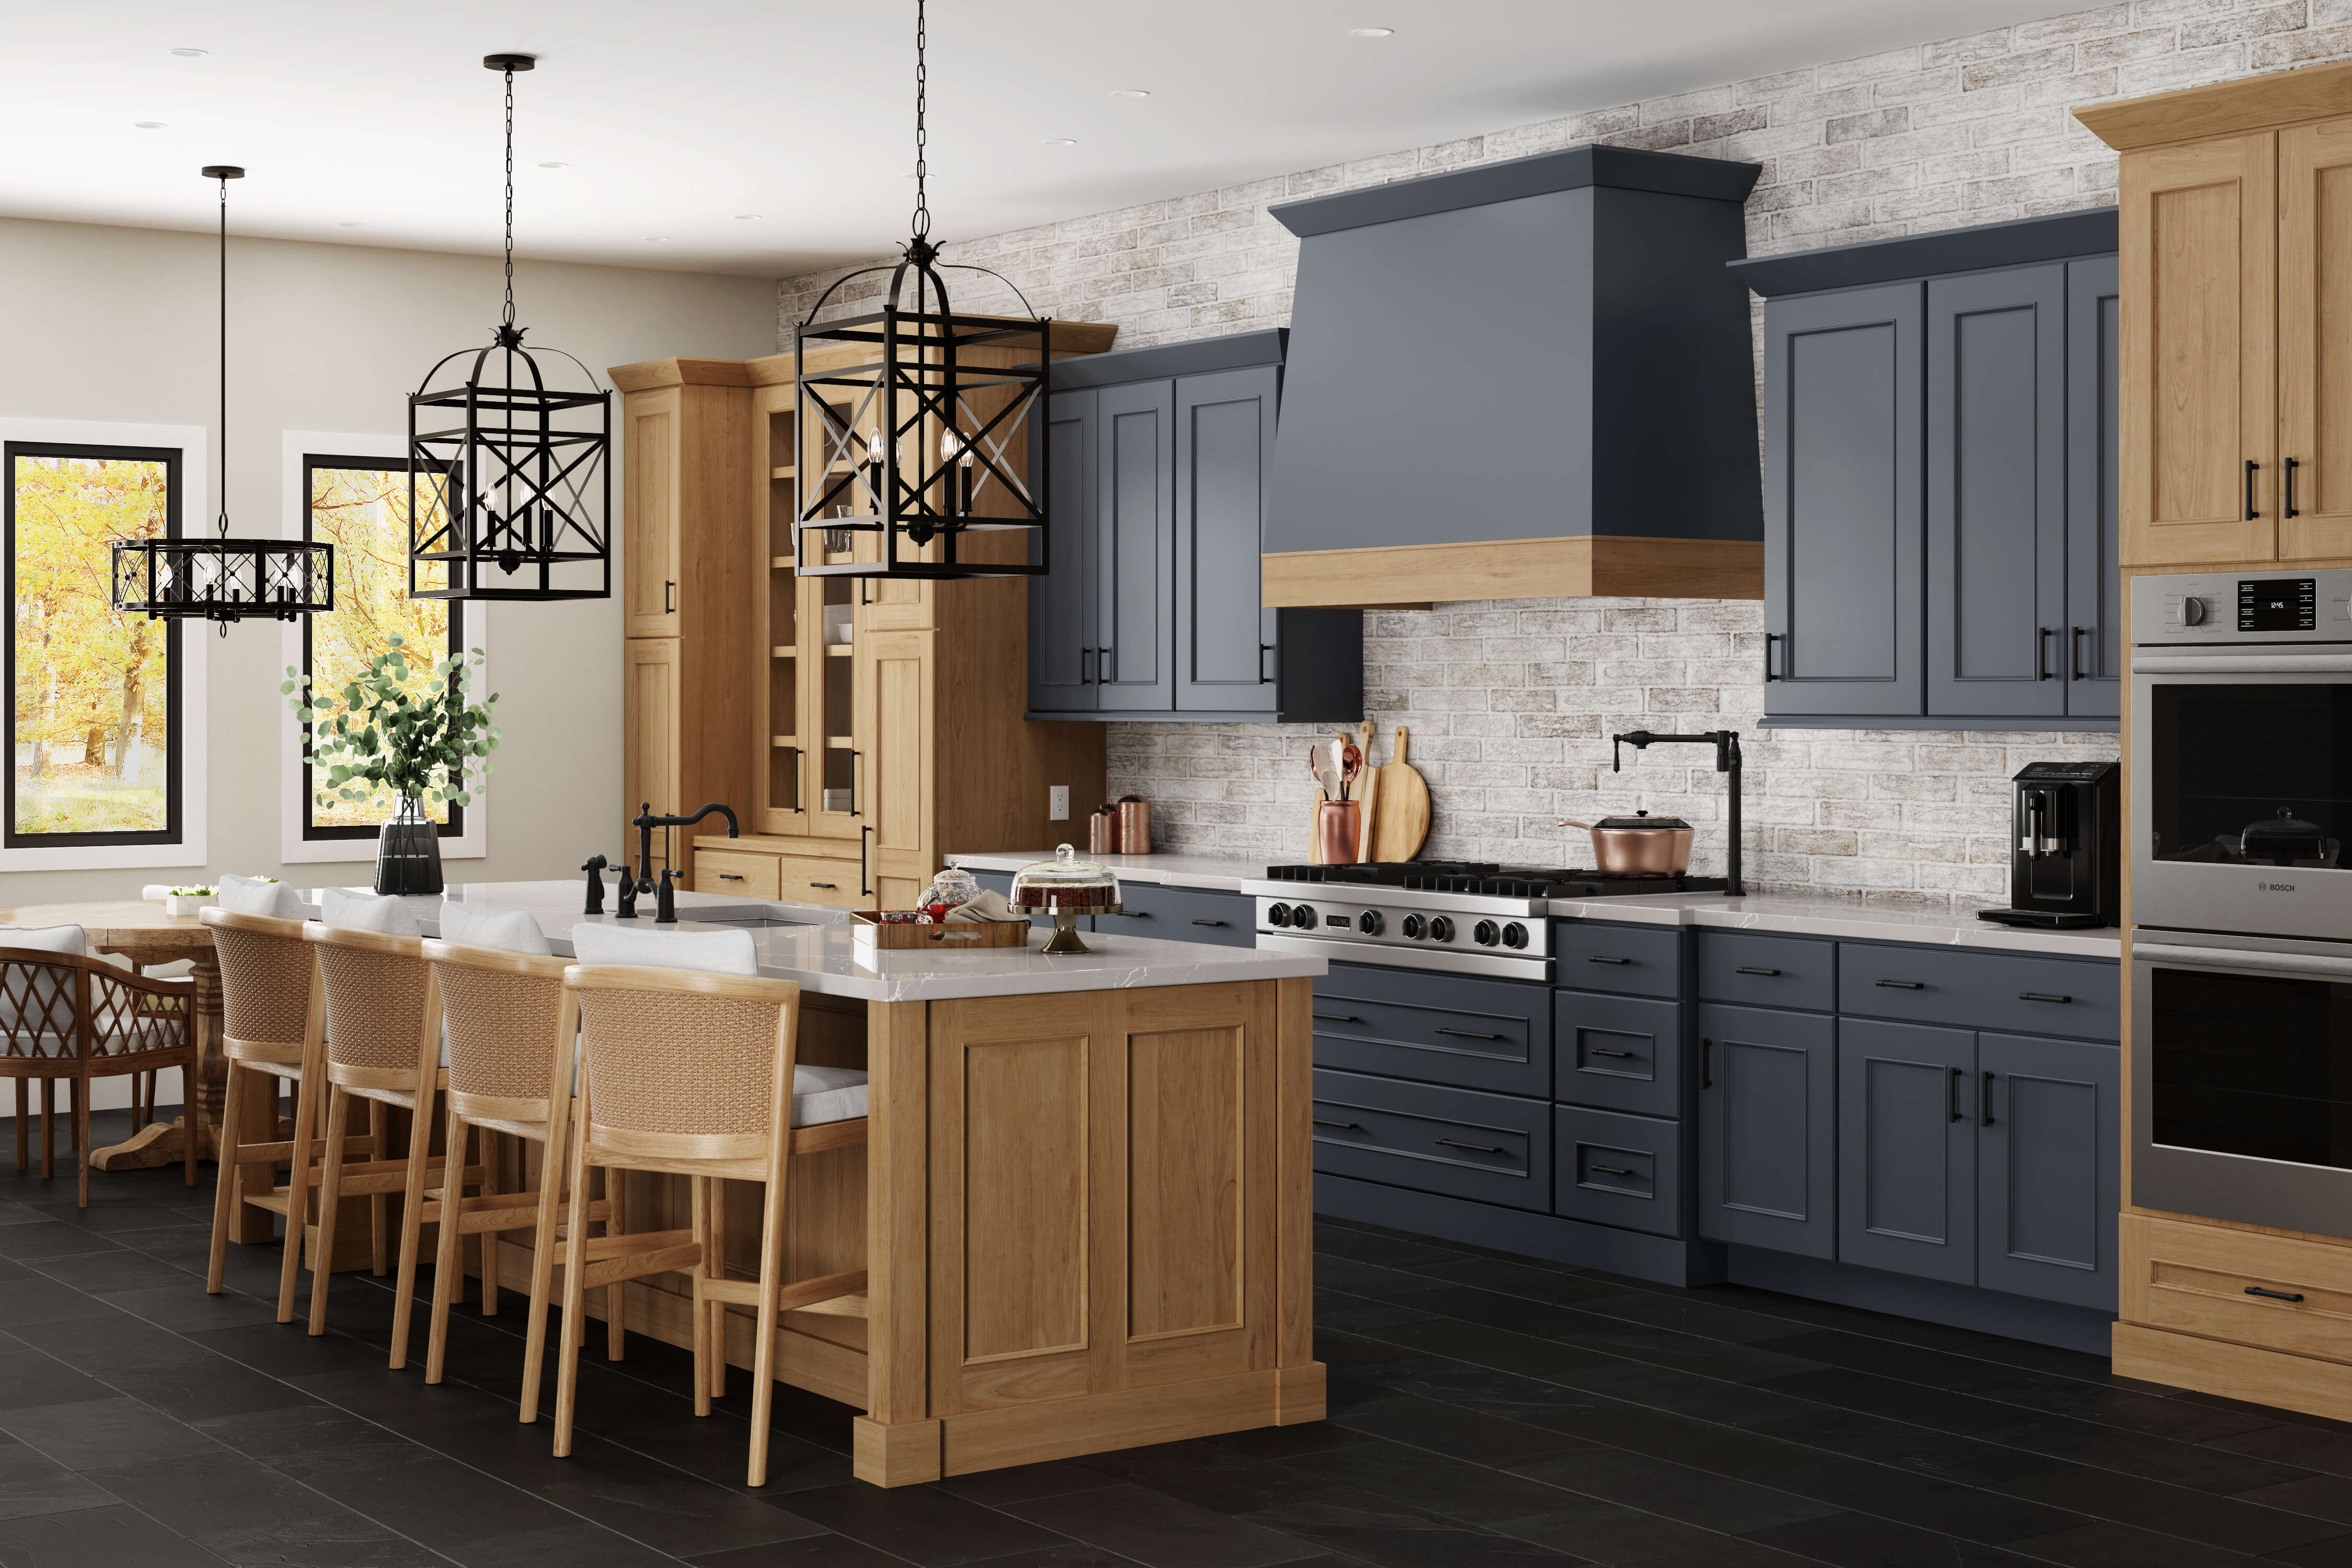 A stunning remodeled kitchen design with an English style and modern finishes showing a dark navy blue painted cabinets with medium stained cherry cabinets.